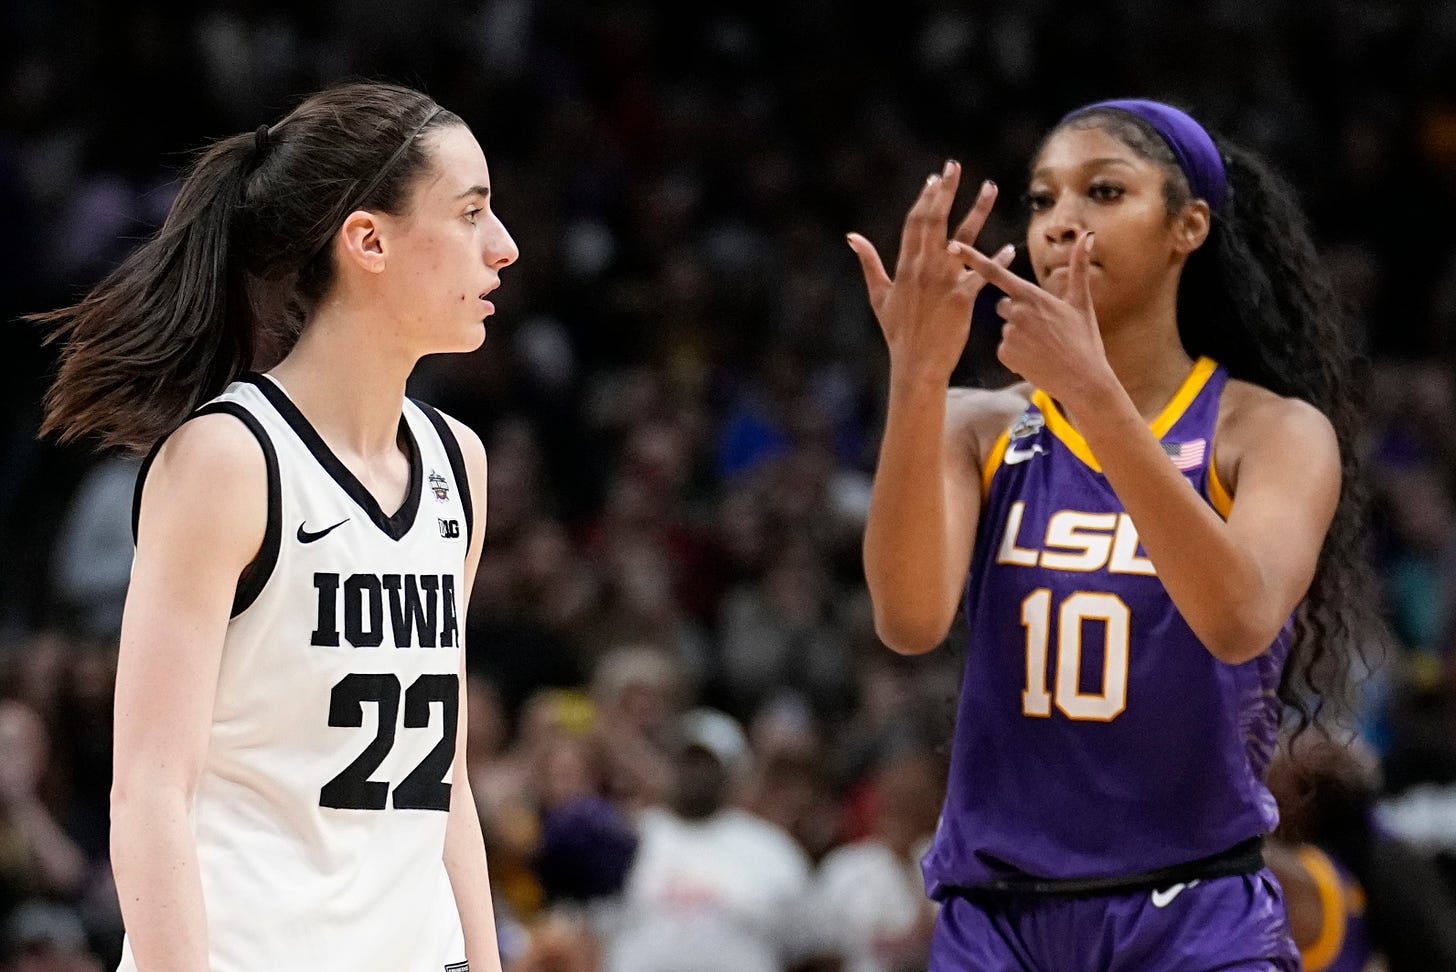 LSU's Angel Reese defends ring finger, 'you can't see me' gestures toward  Iowa's Caitlin Clark in NCAA title win (video) - cleveland.com